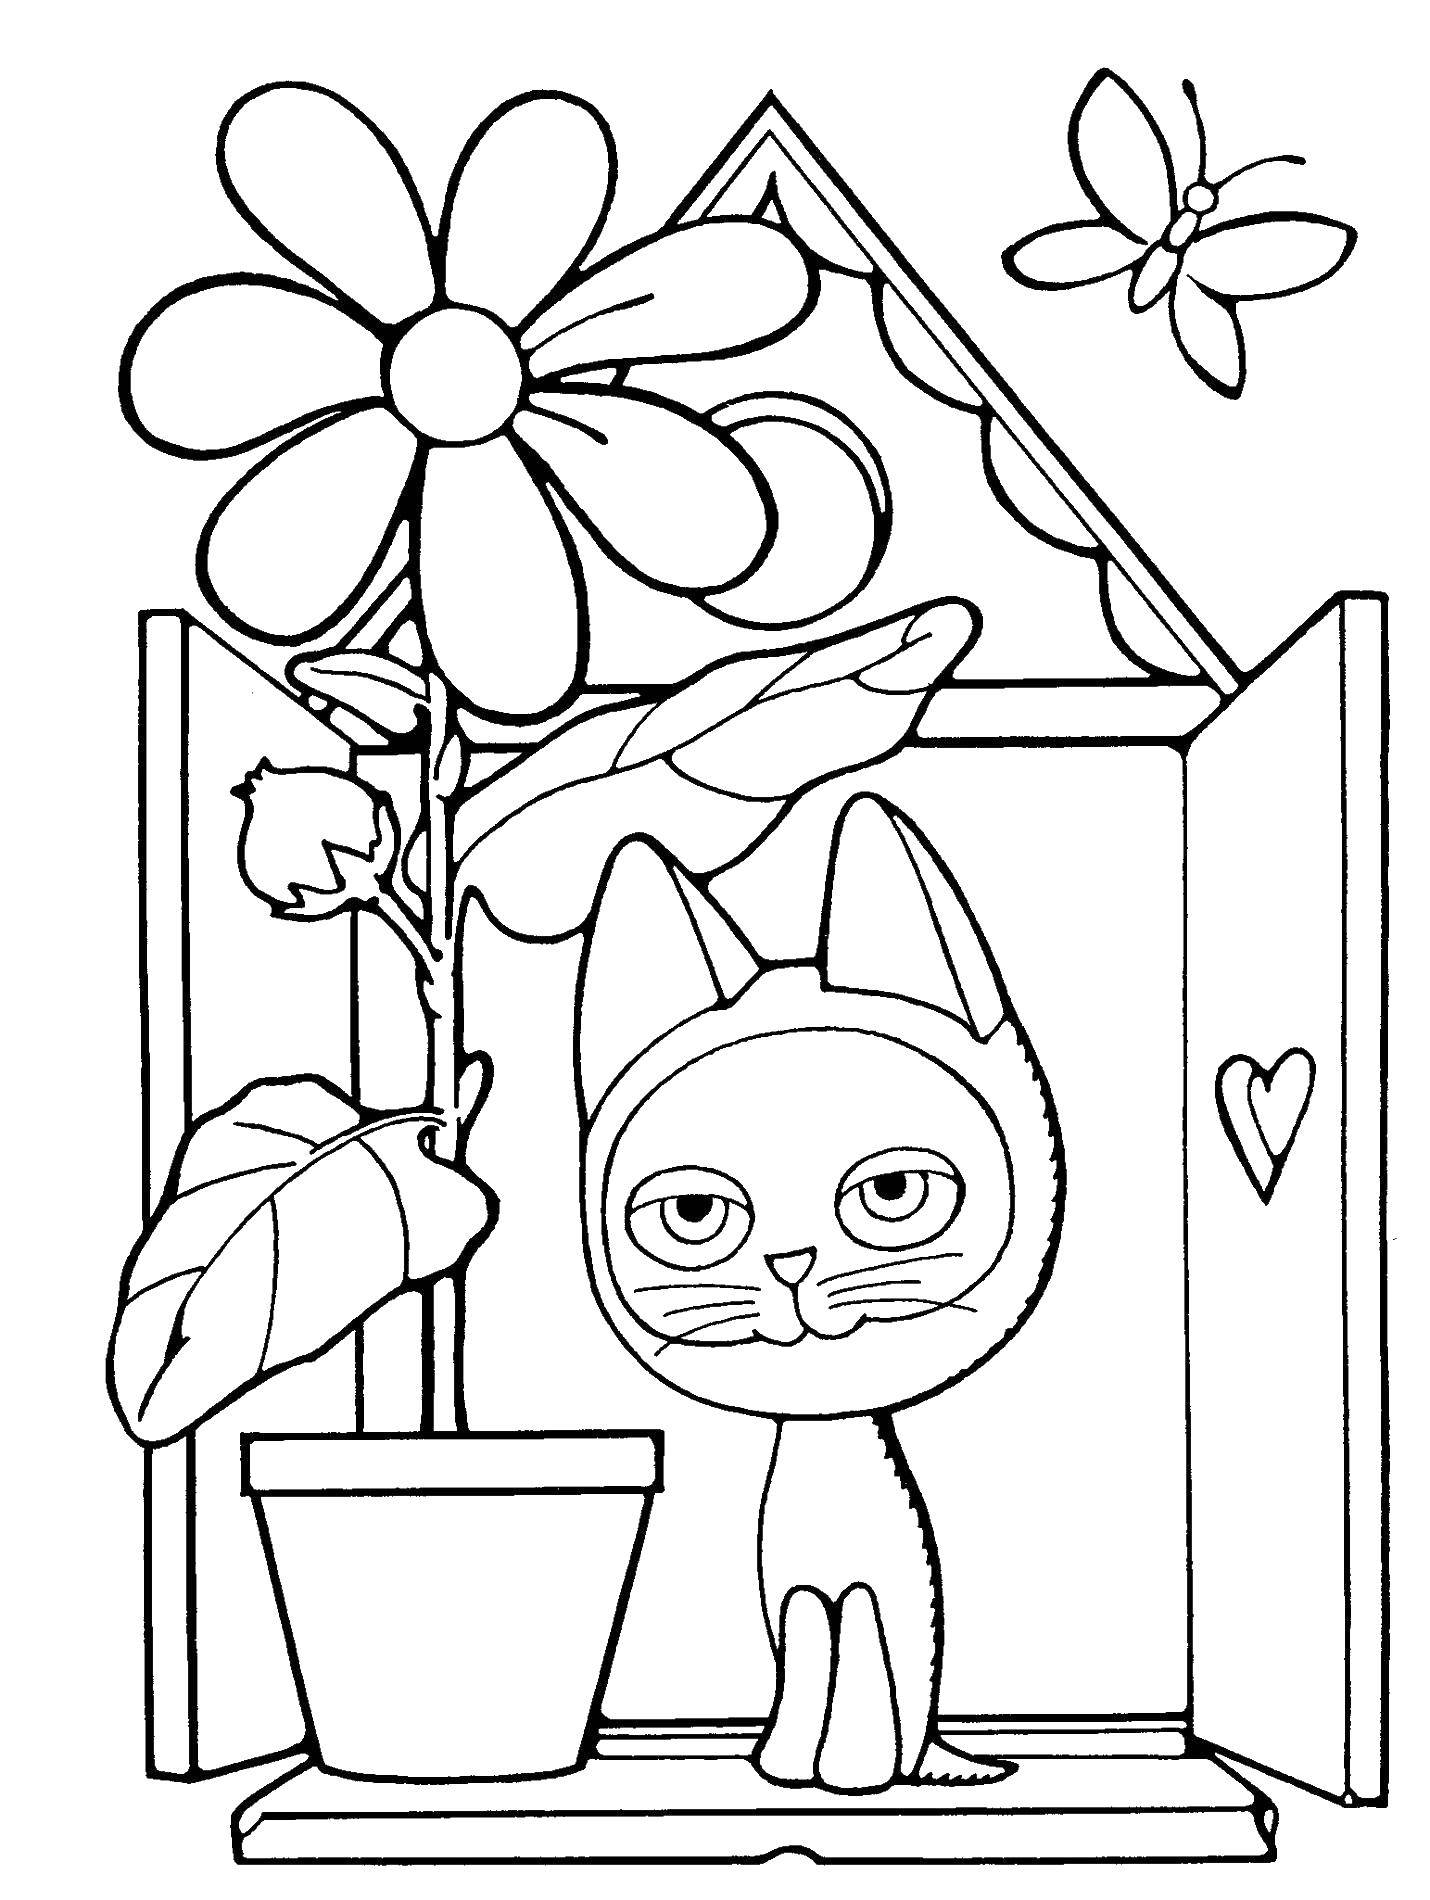 Coloring Kitten named woof. Category Soviet coloring. Tags:  cat, cat.